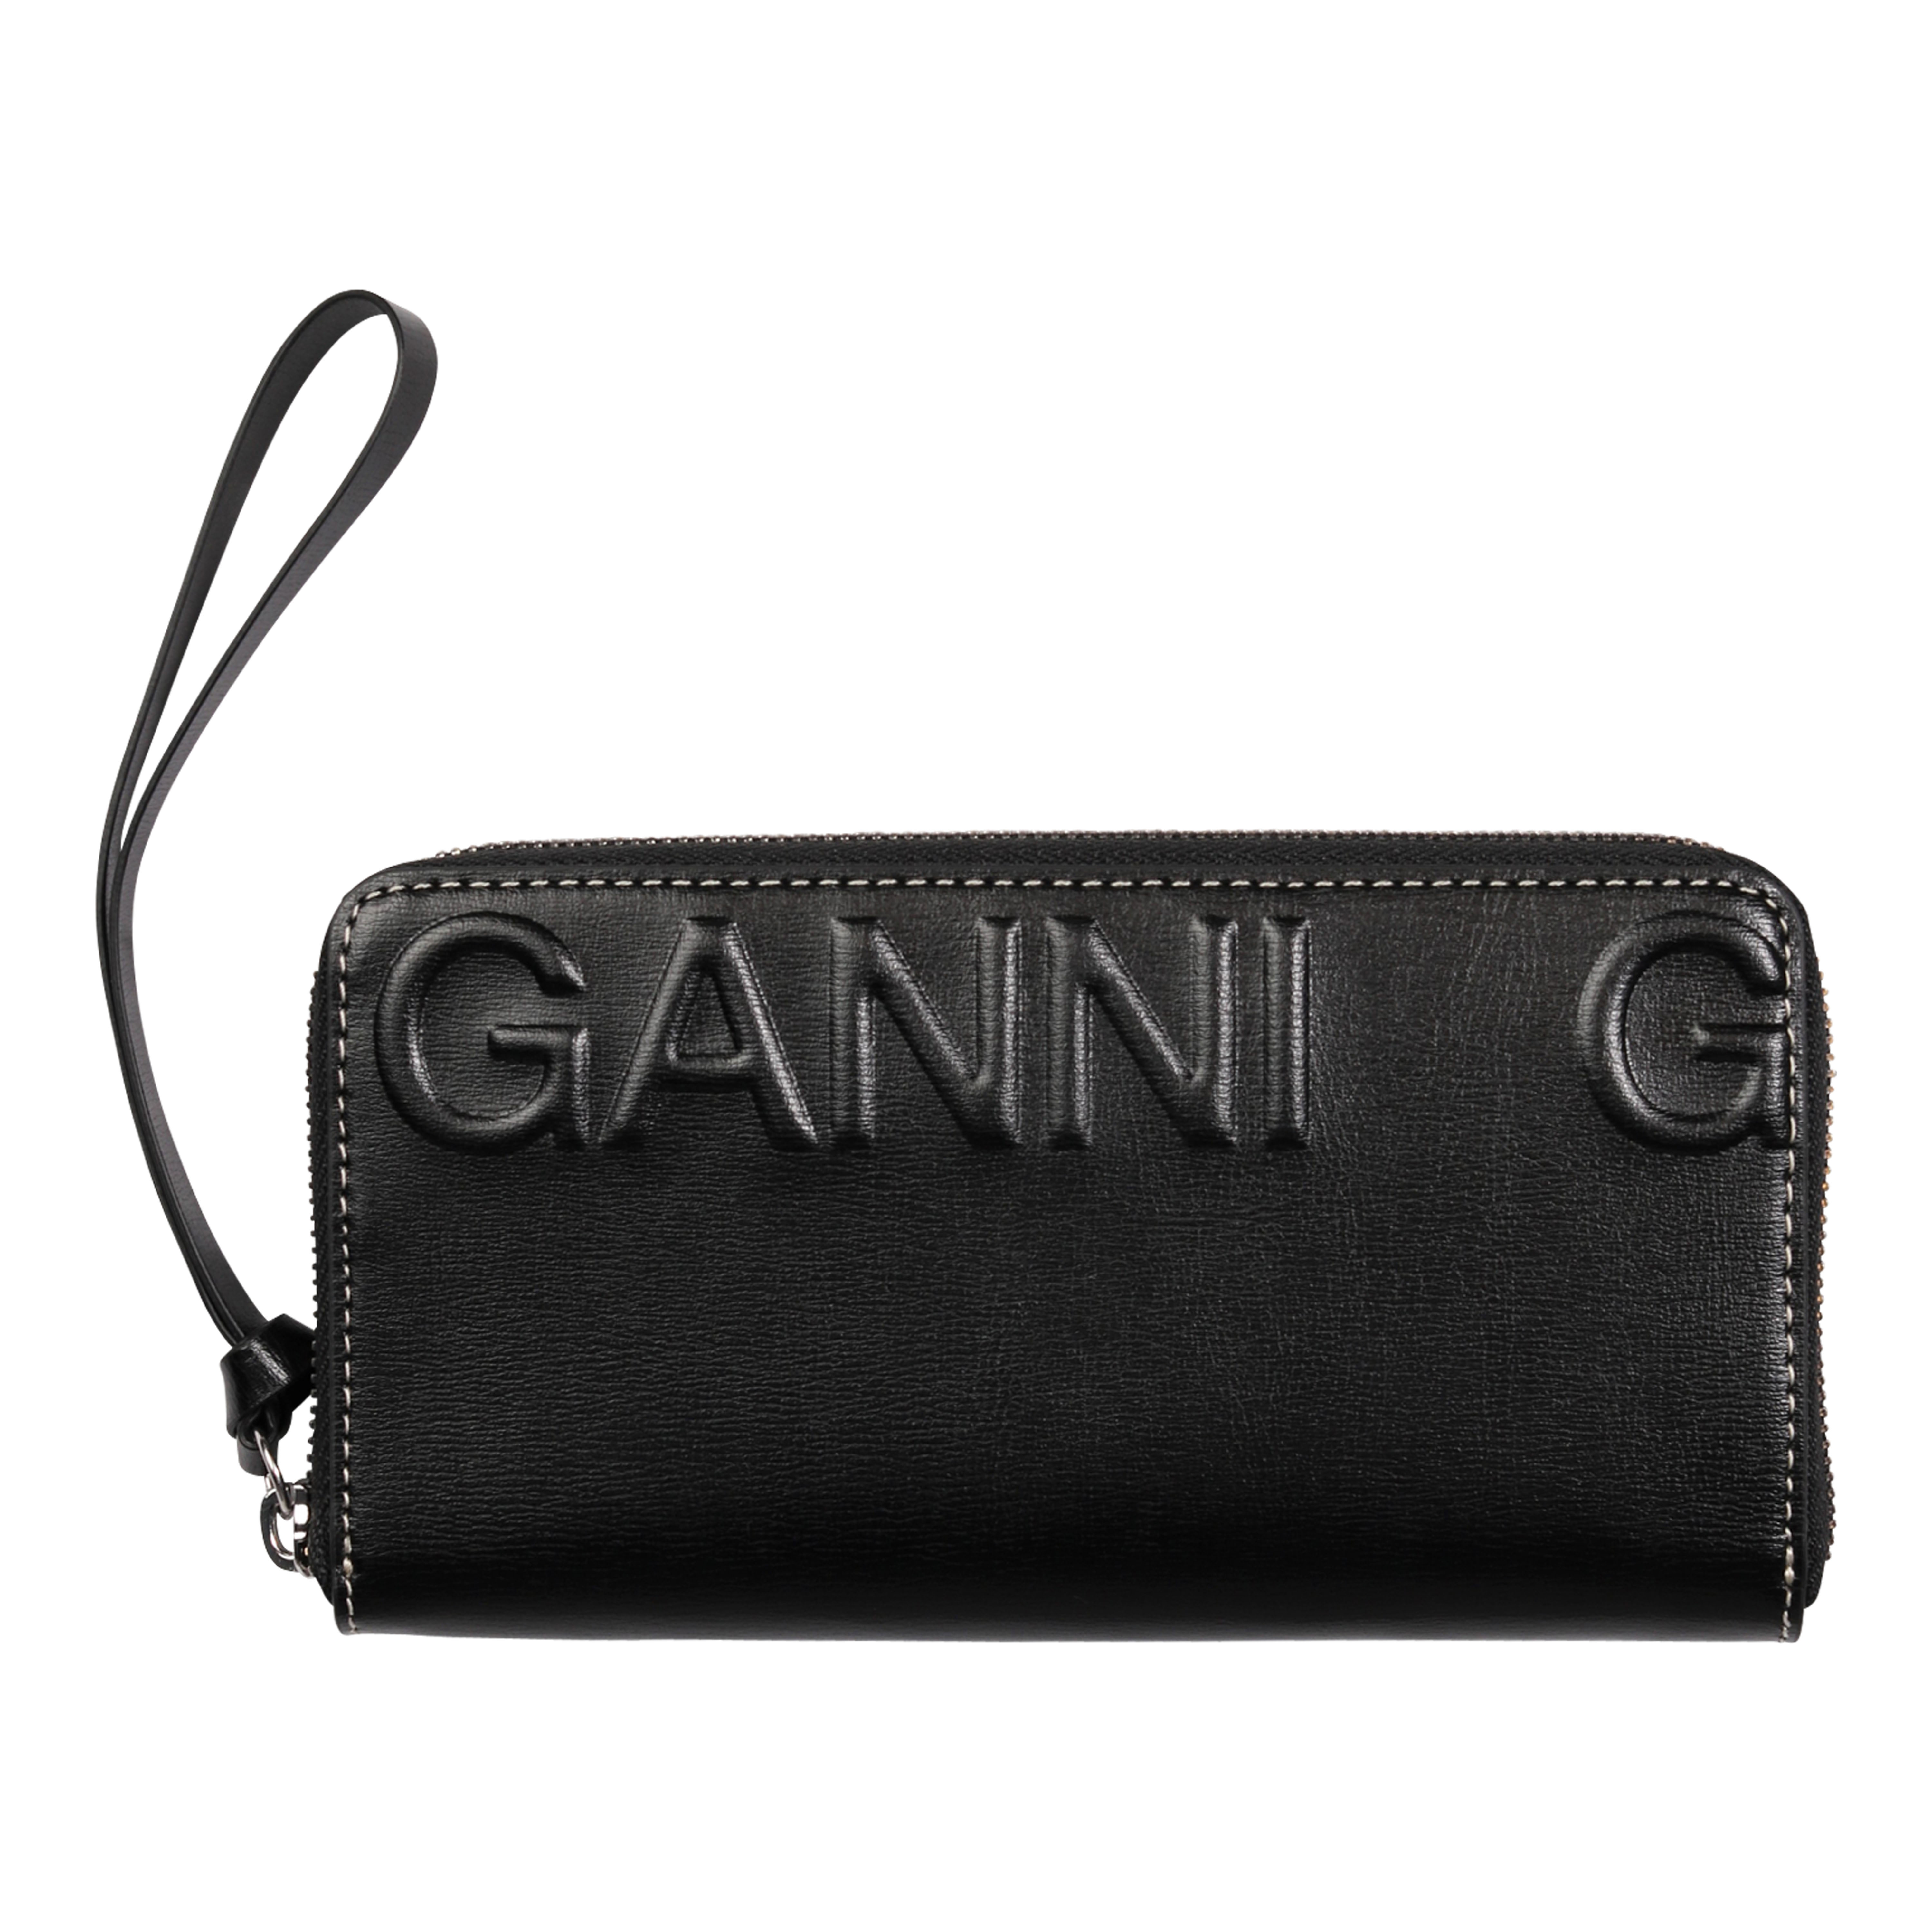 Ganni Recycled Leather Zip Wallet in Black